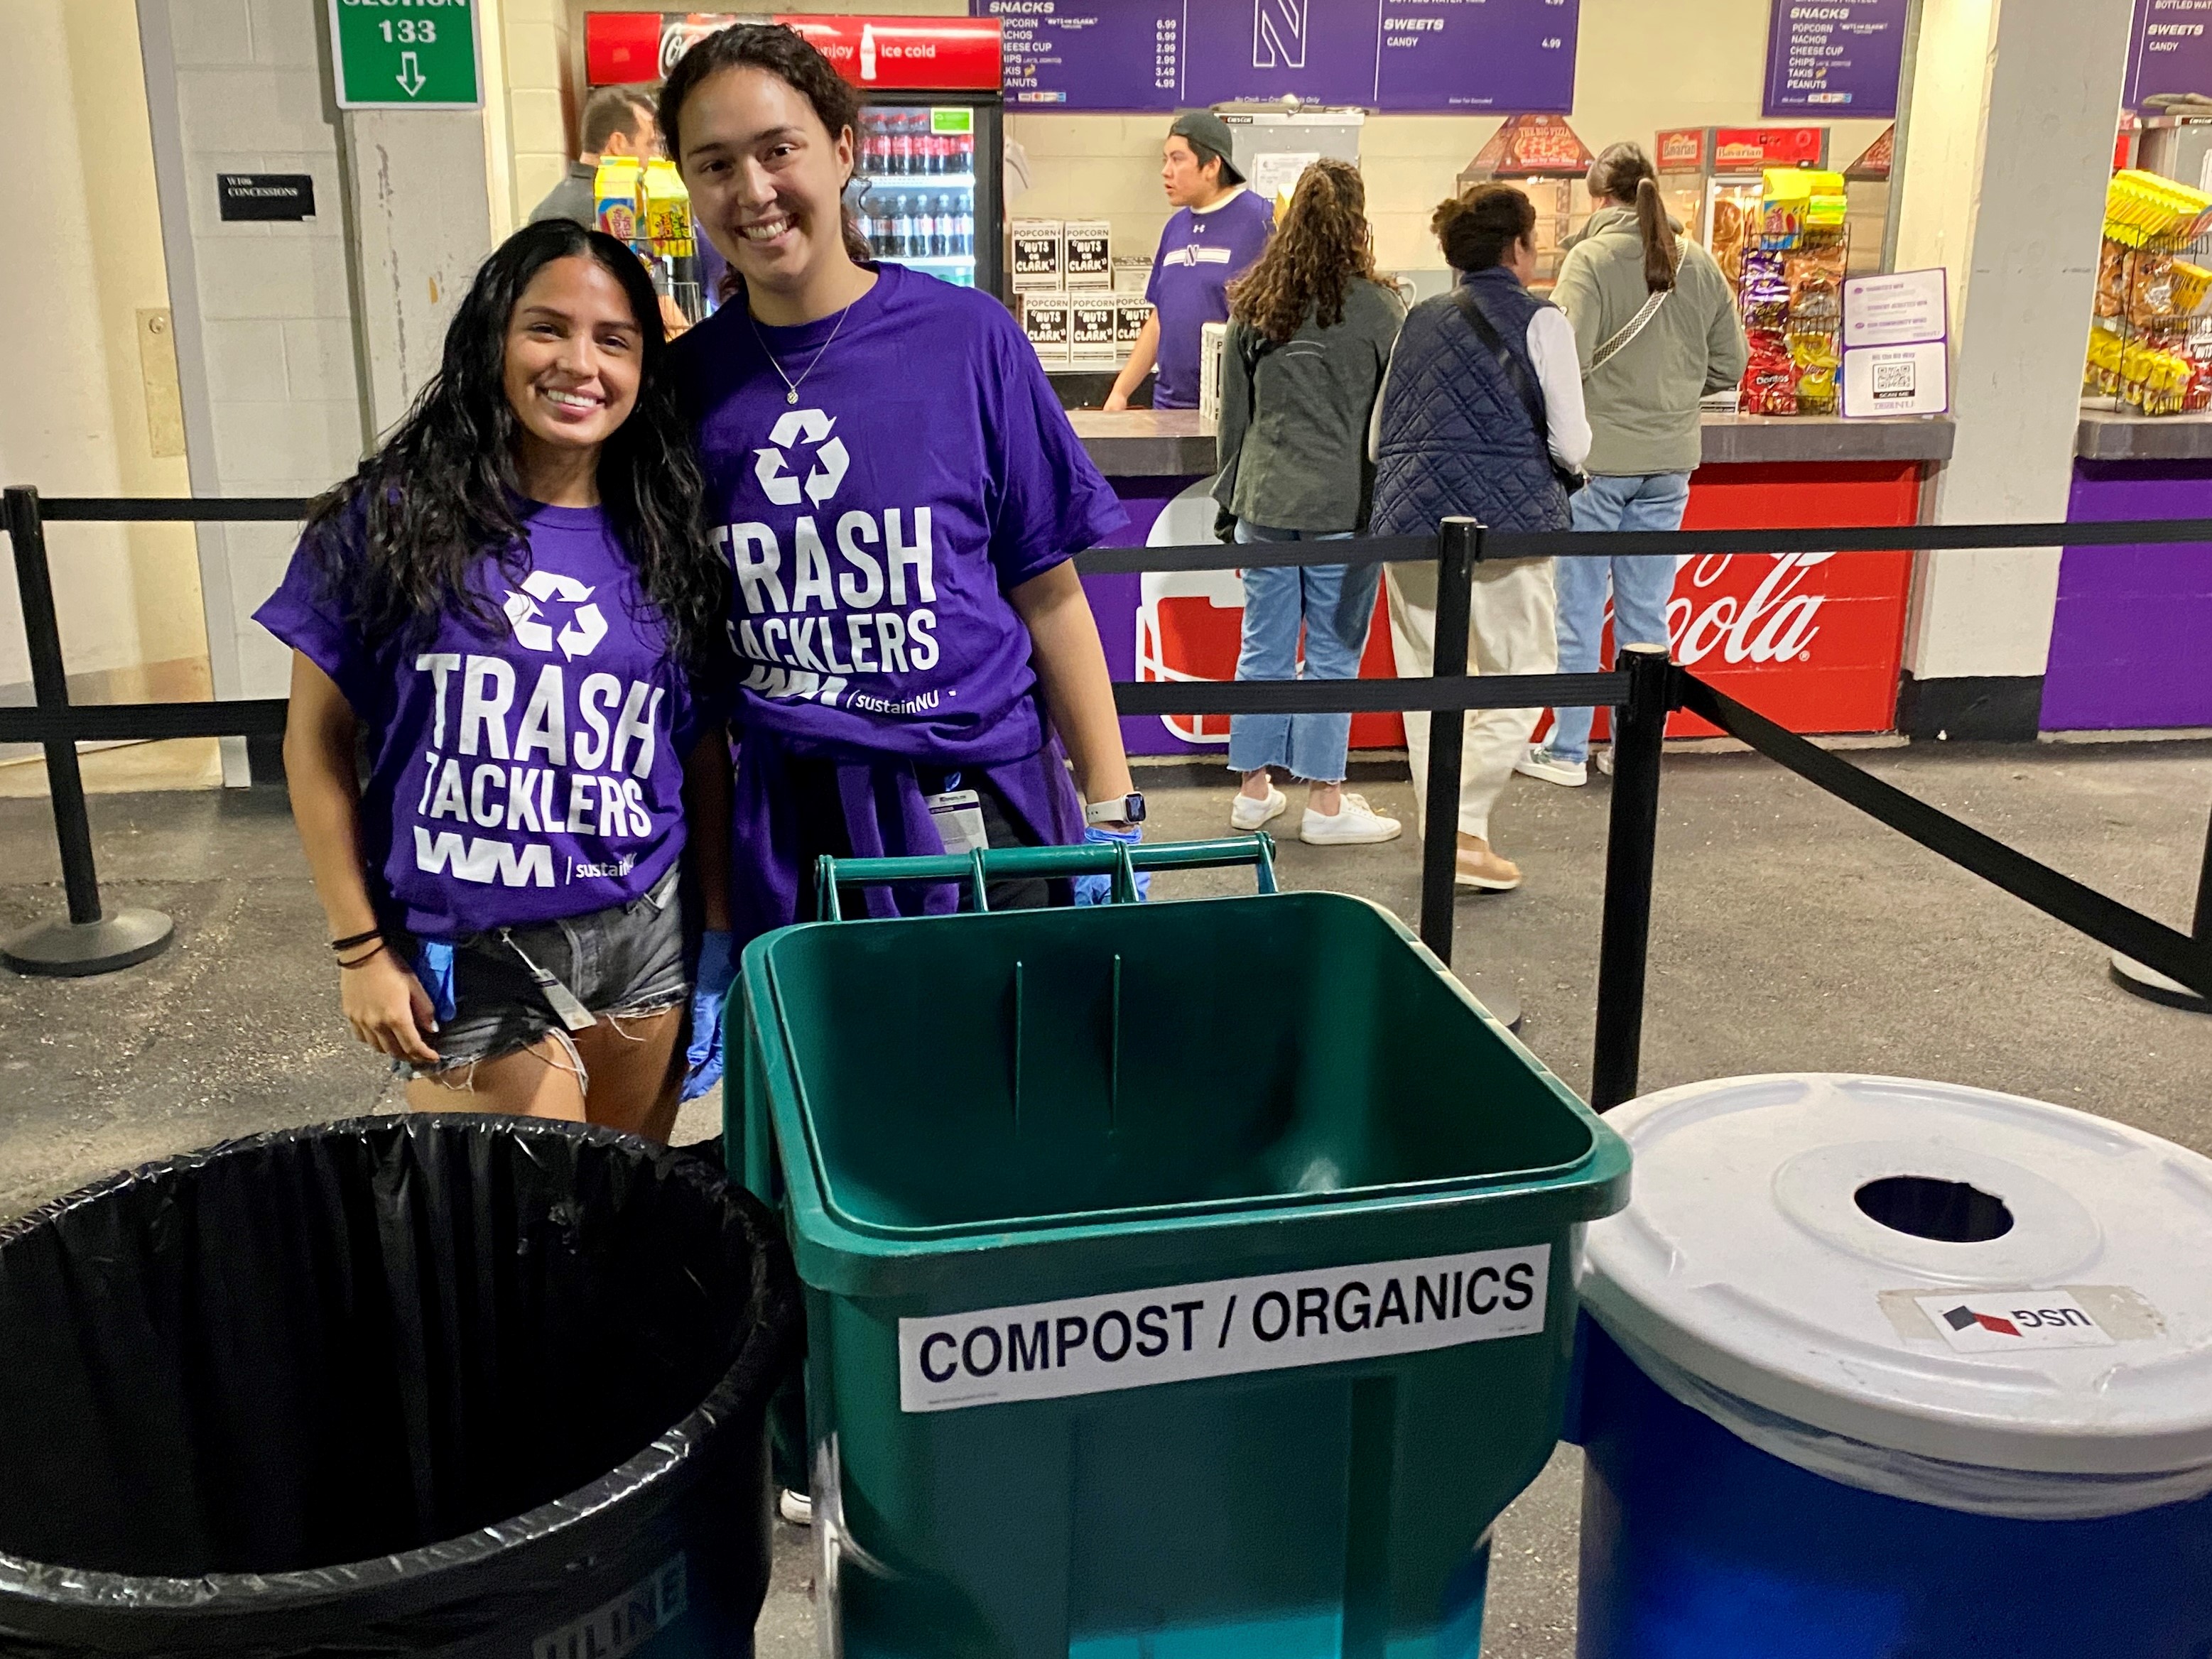 Two students in trash tacklers shirts stand over recycling, composting, and trash bins